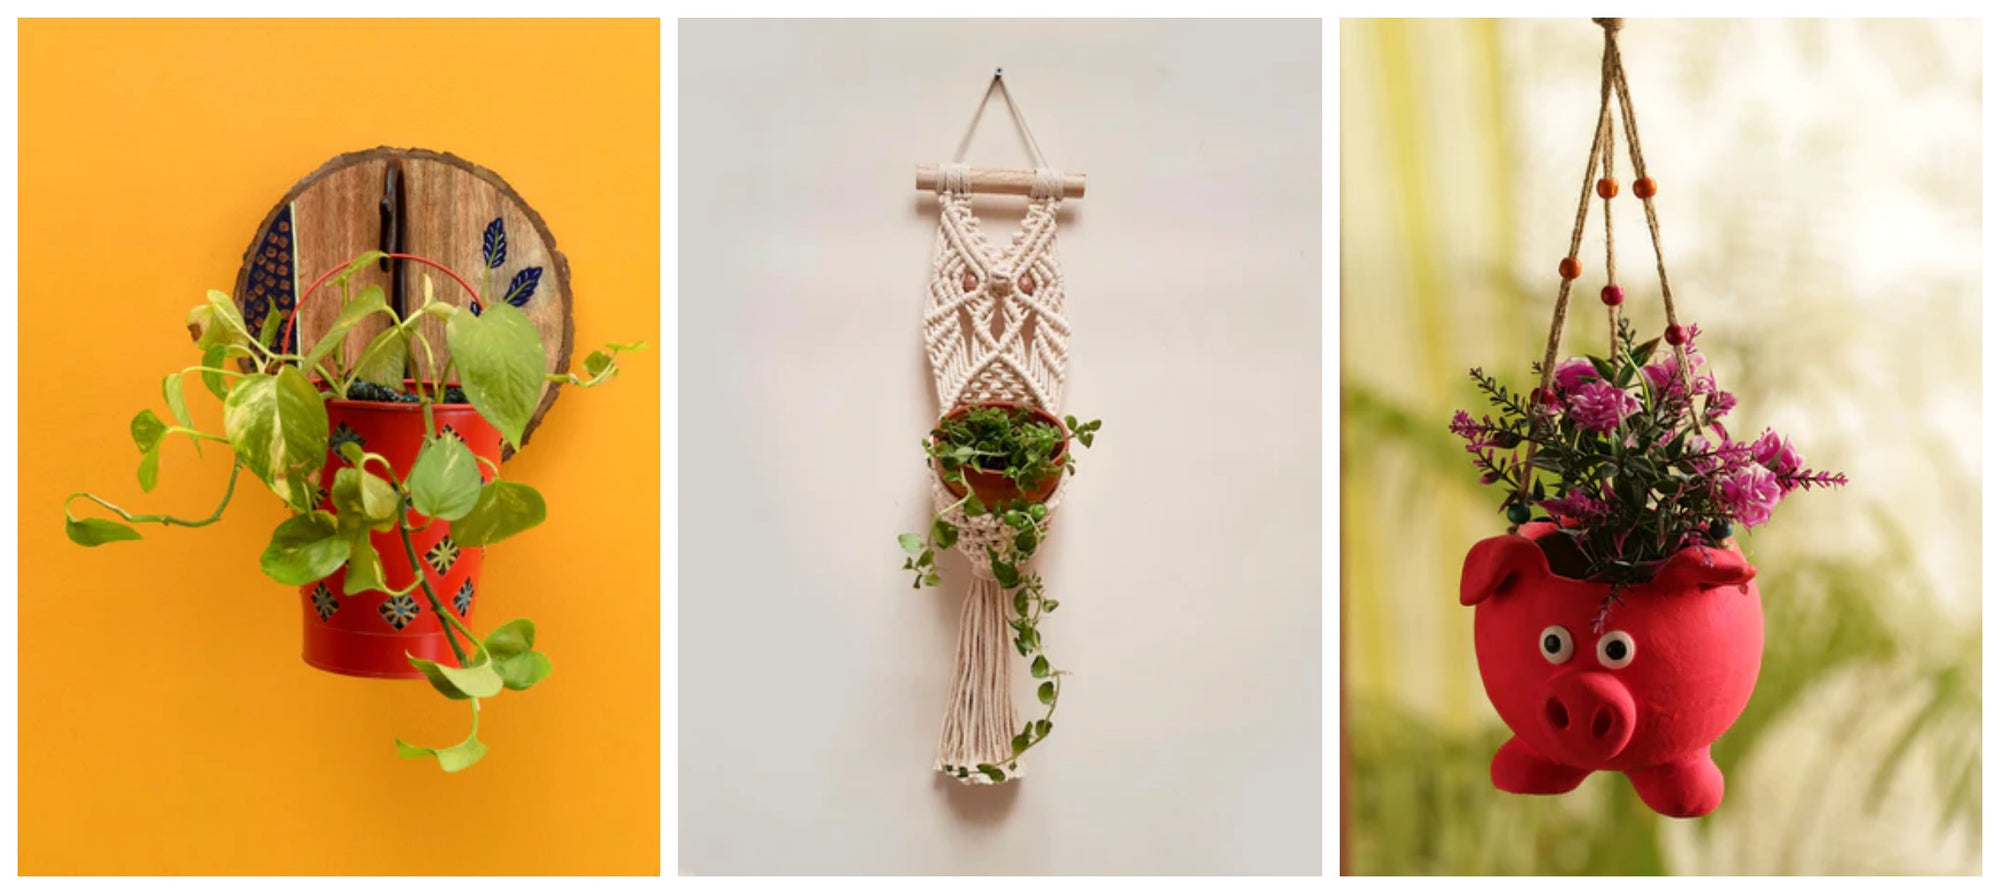 Eco-Friendly Plant Hangers - Your Bit towards a Greener Environment